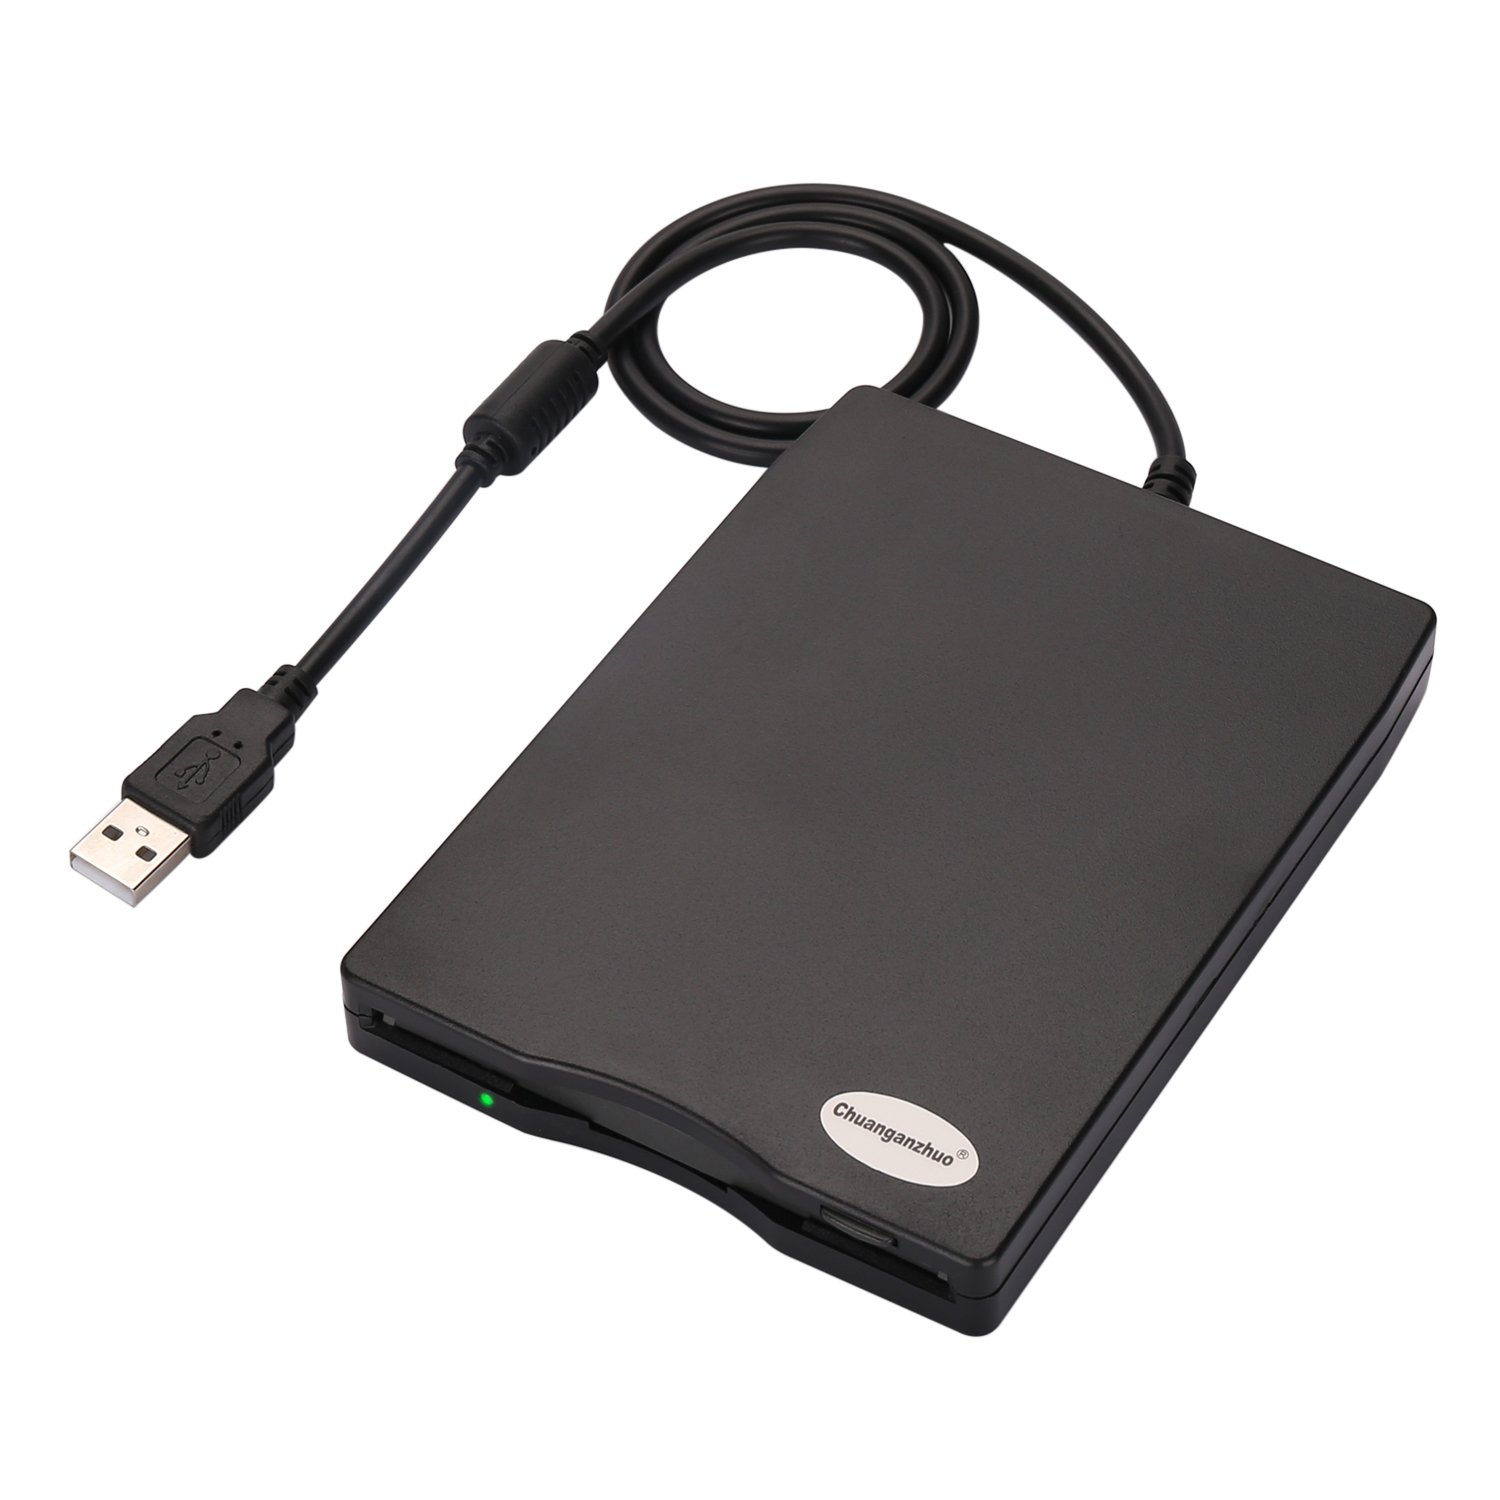 Sony usb floppy disk drive mpf82e driver for mac